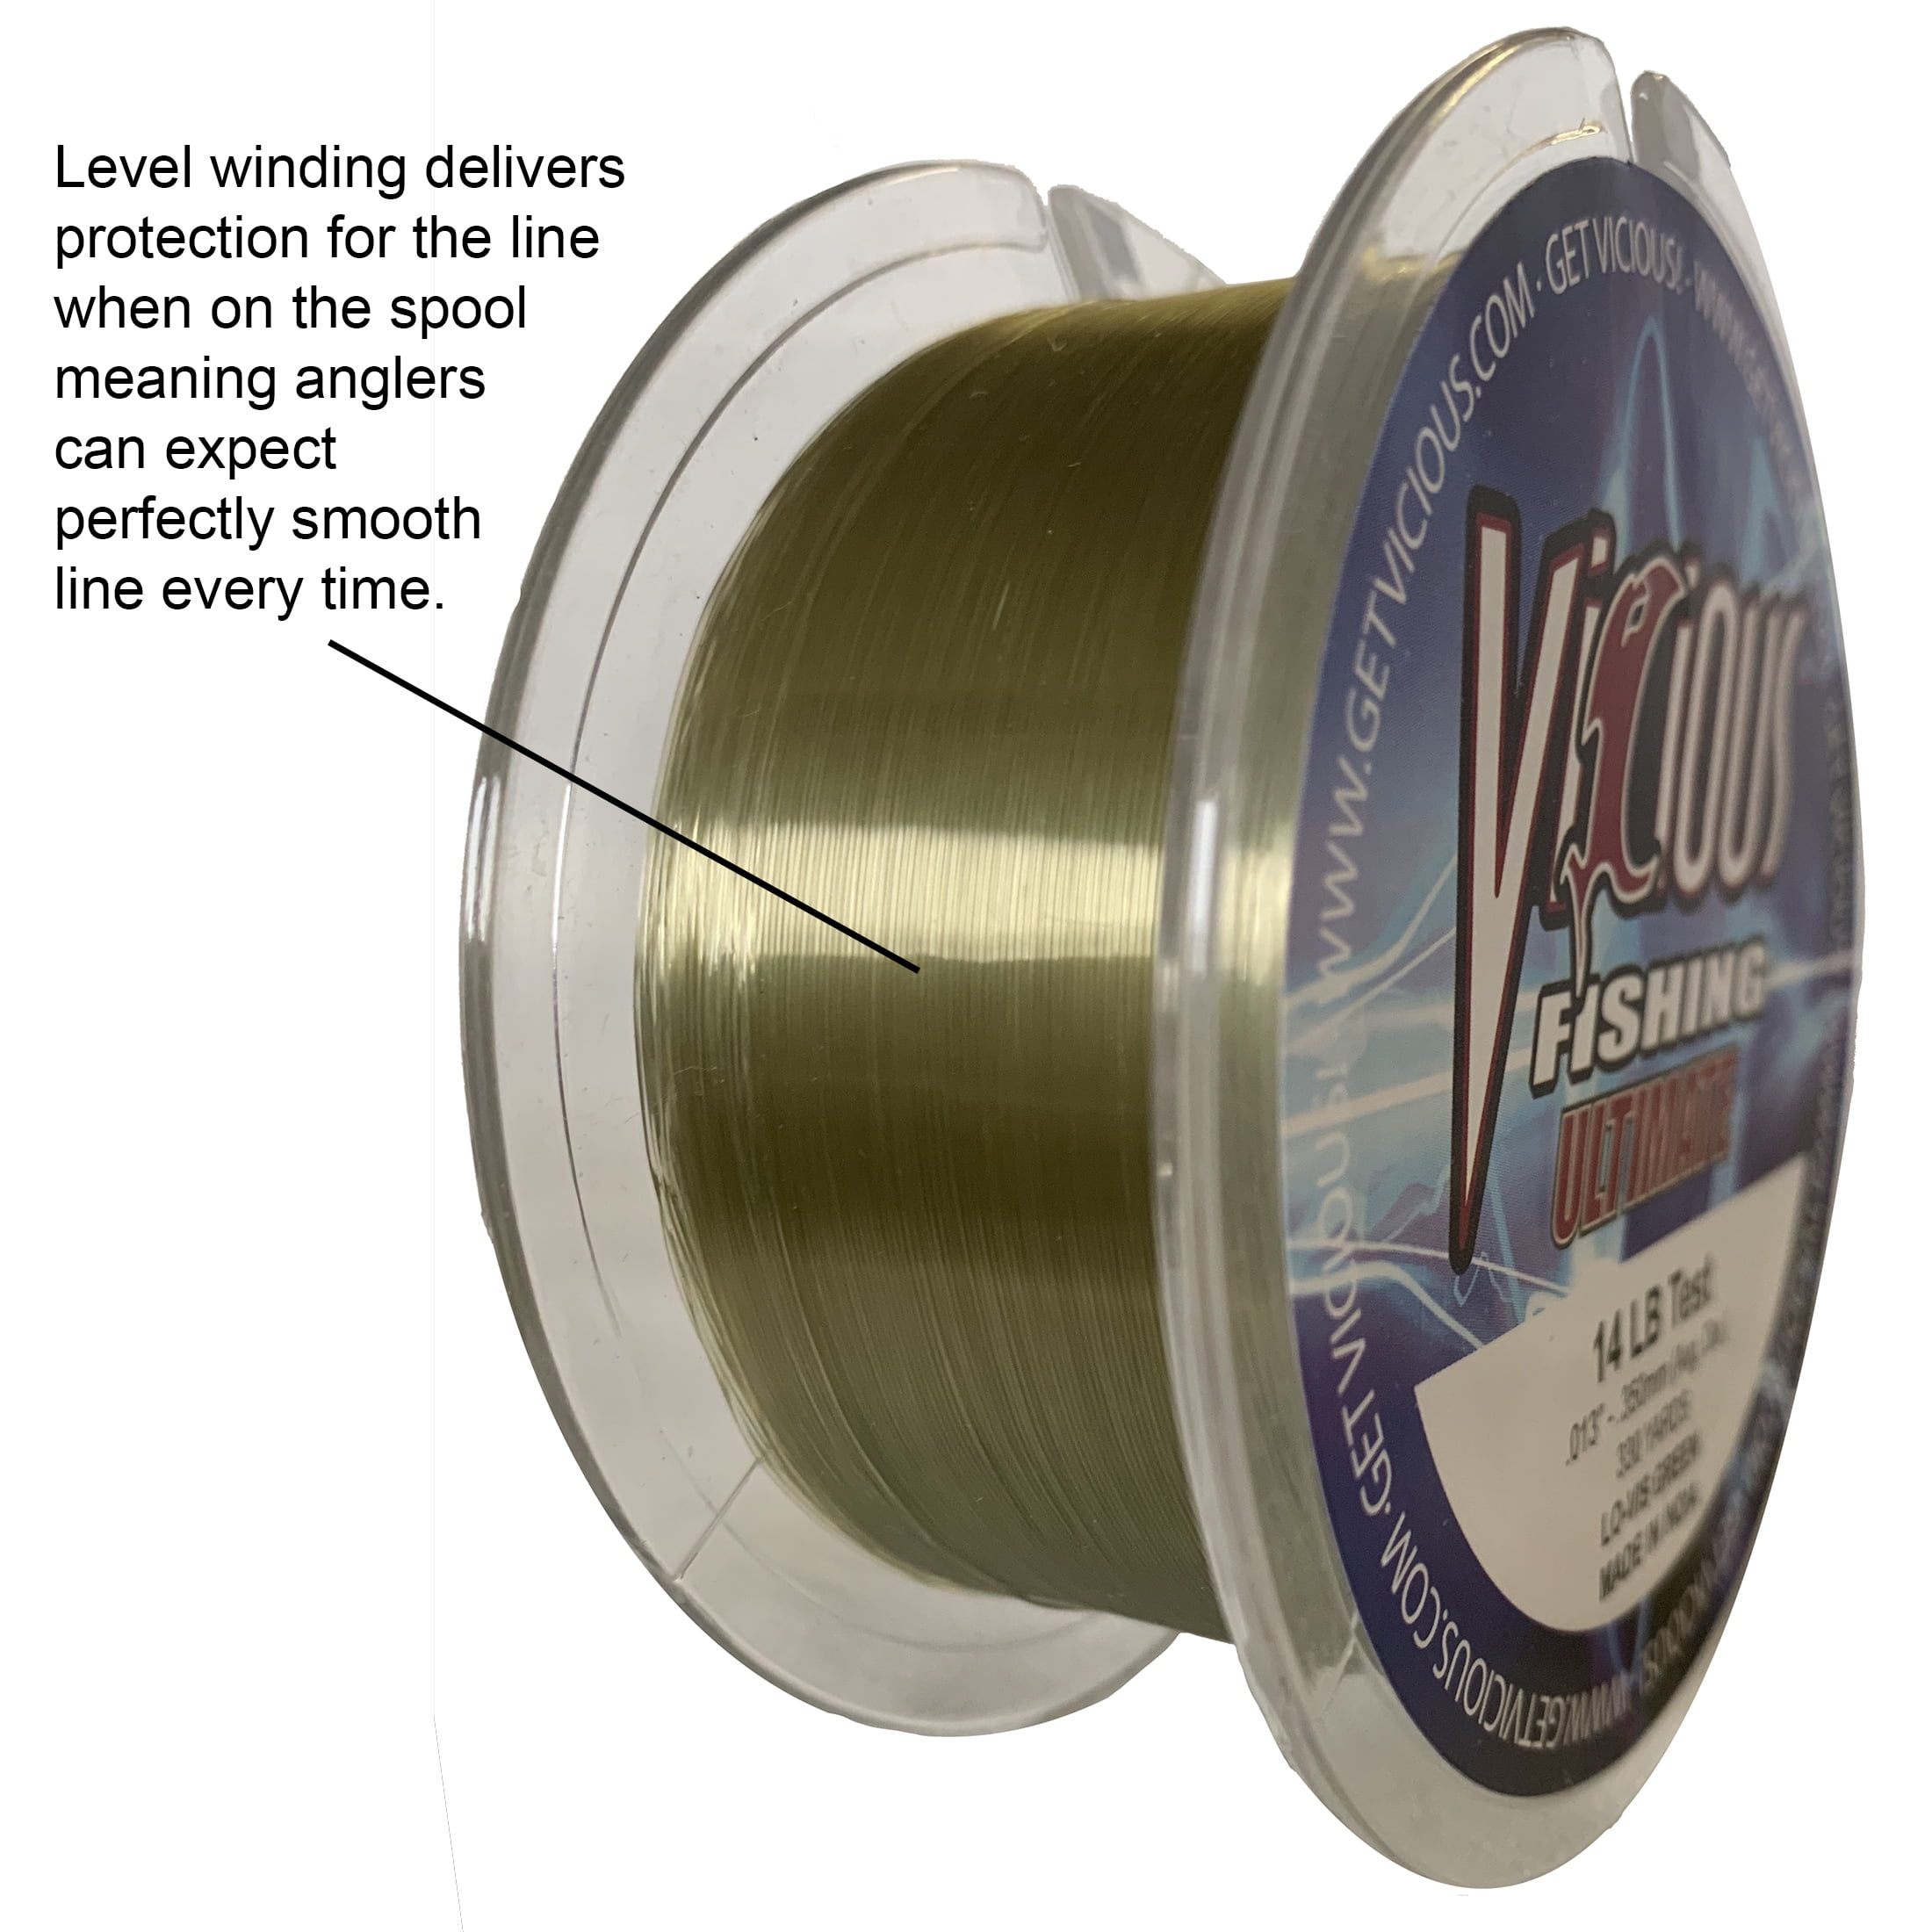 Vicious FLD-6 Fluorocarbon Fishing Line 6 LB. 500 Yards .008 Dia. Clear